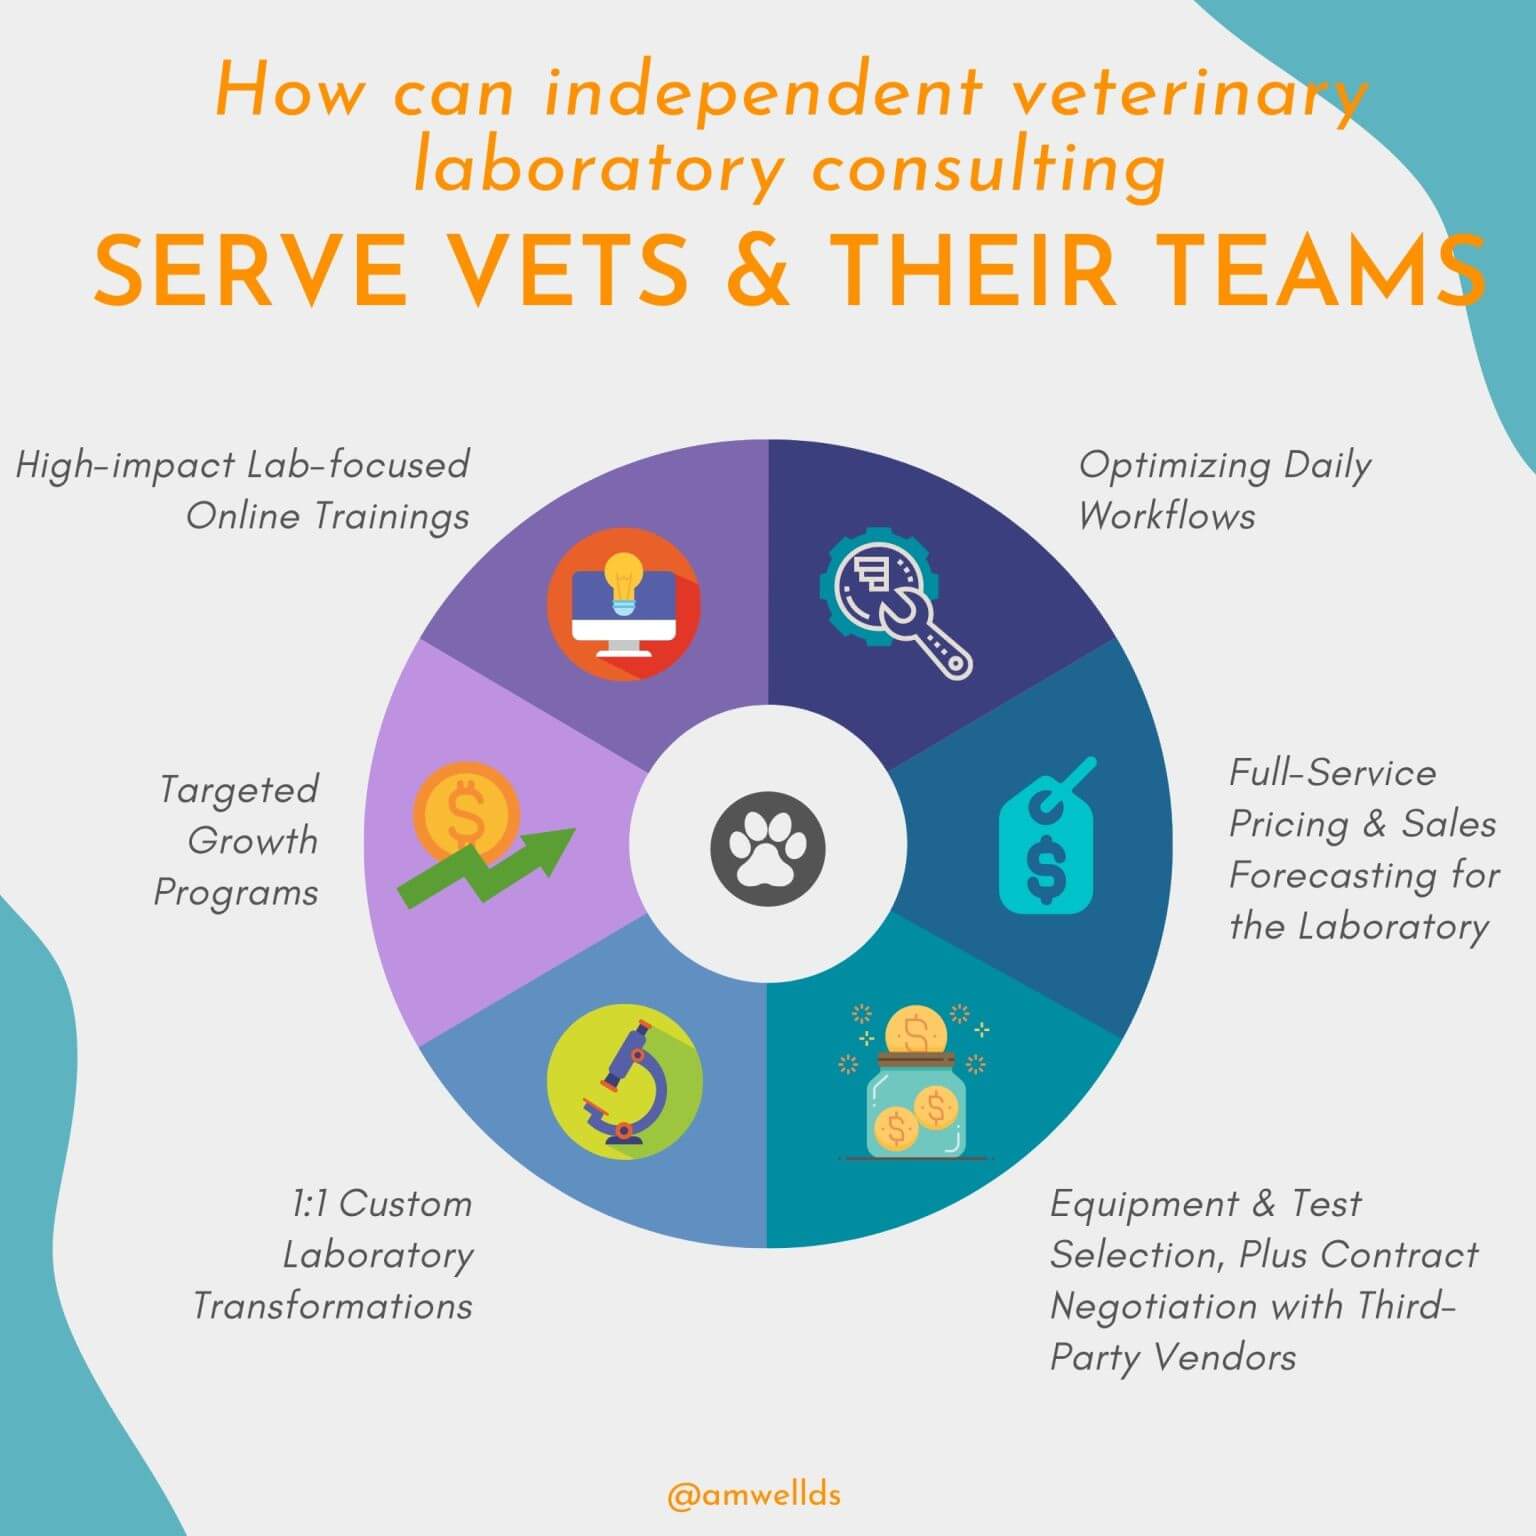 How Independent Veterinary Laboratory Consulting Serves Veterinary Teams